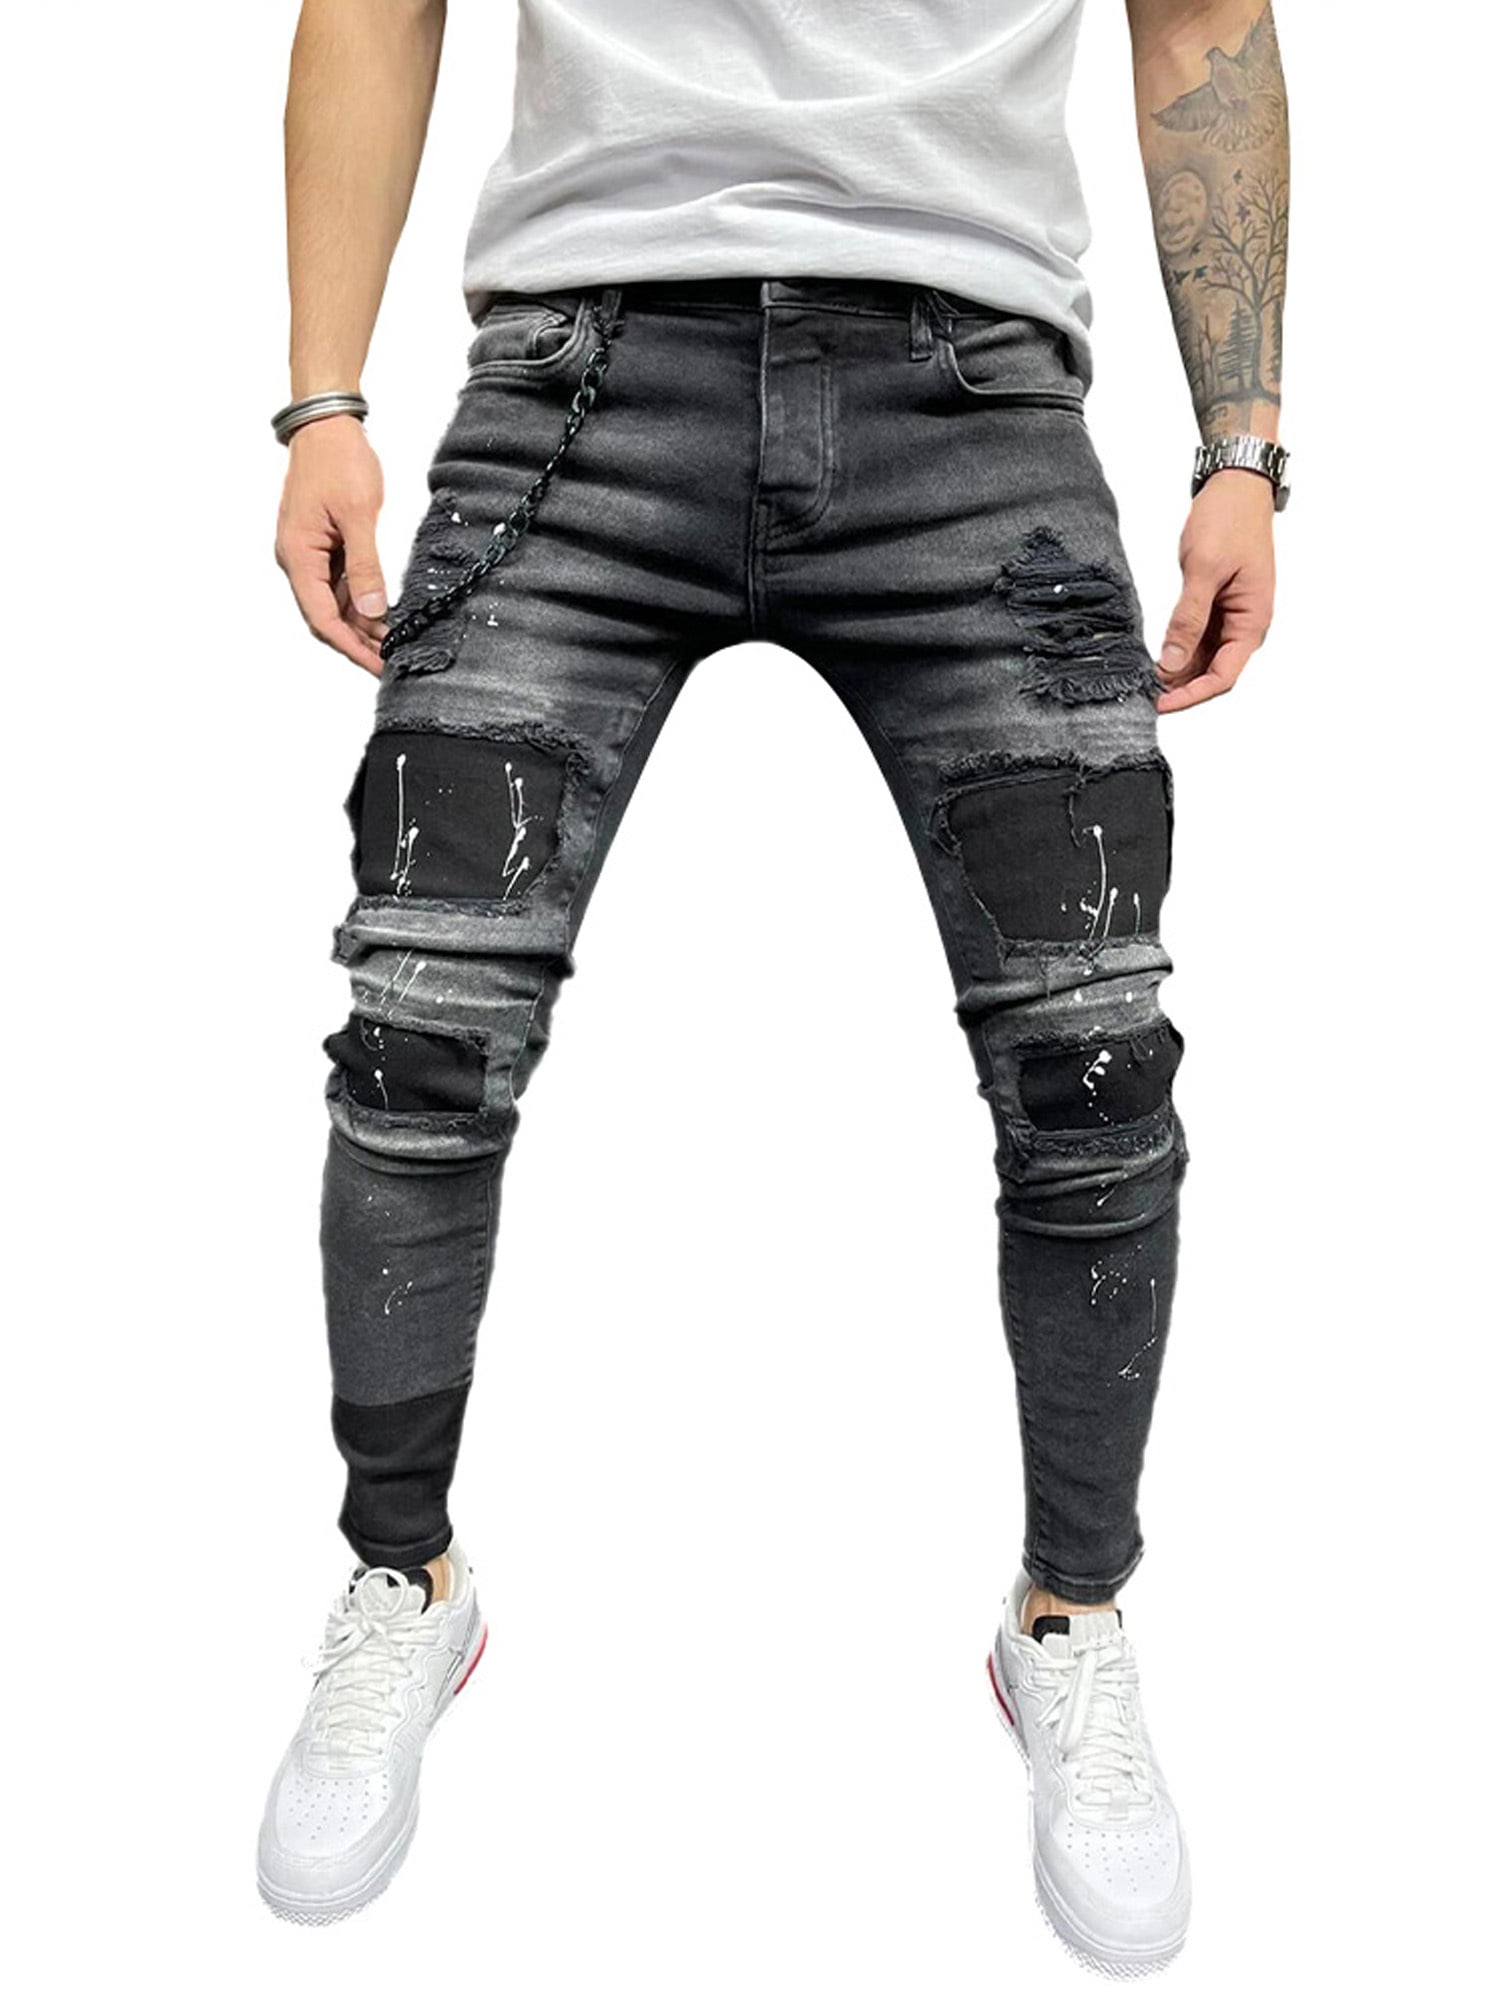 Mens Jeans Skinny Ripped Frayed Denim Pants Jegging Stretch Slim Pencil Trousers 